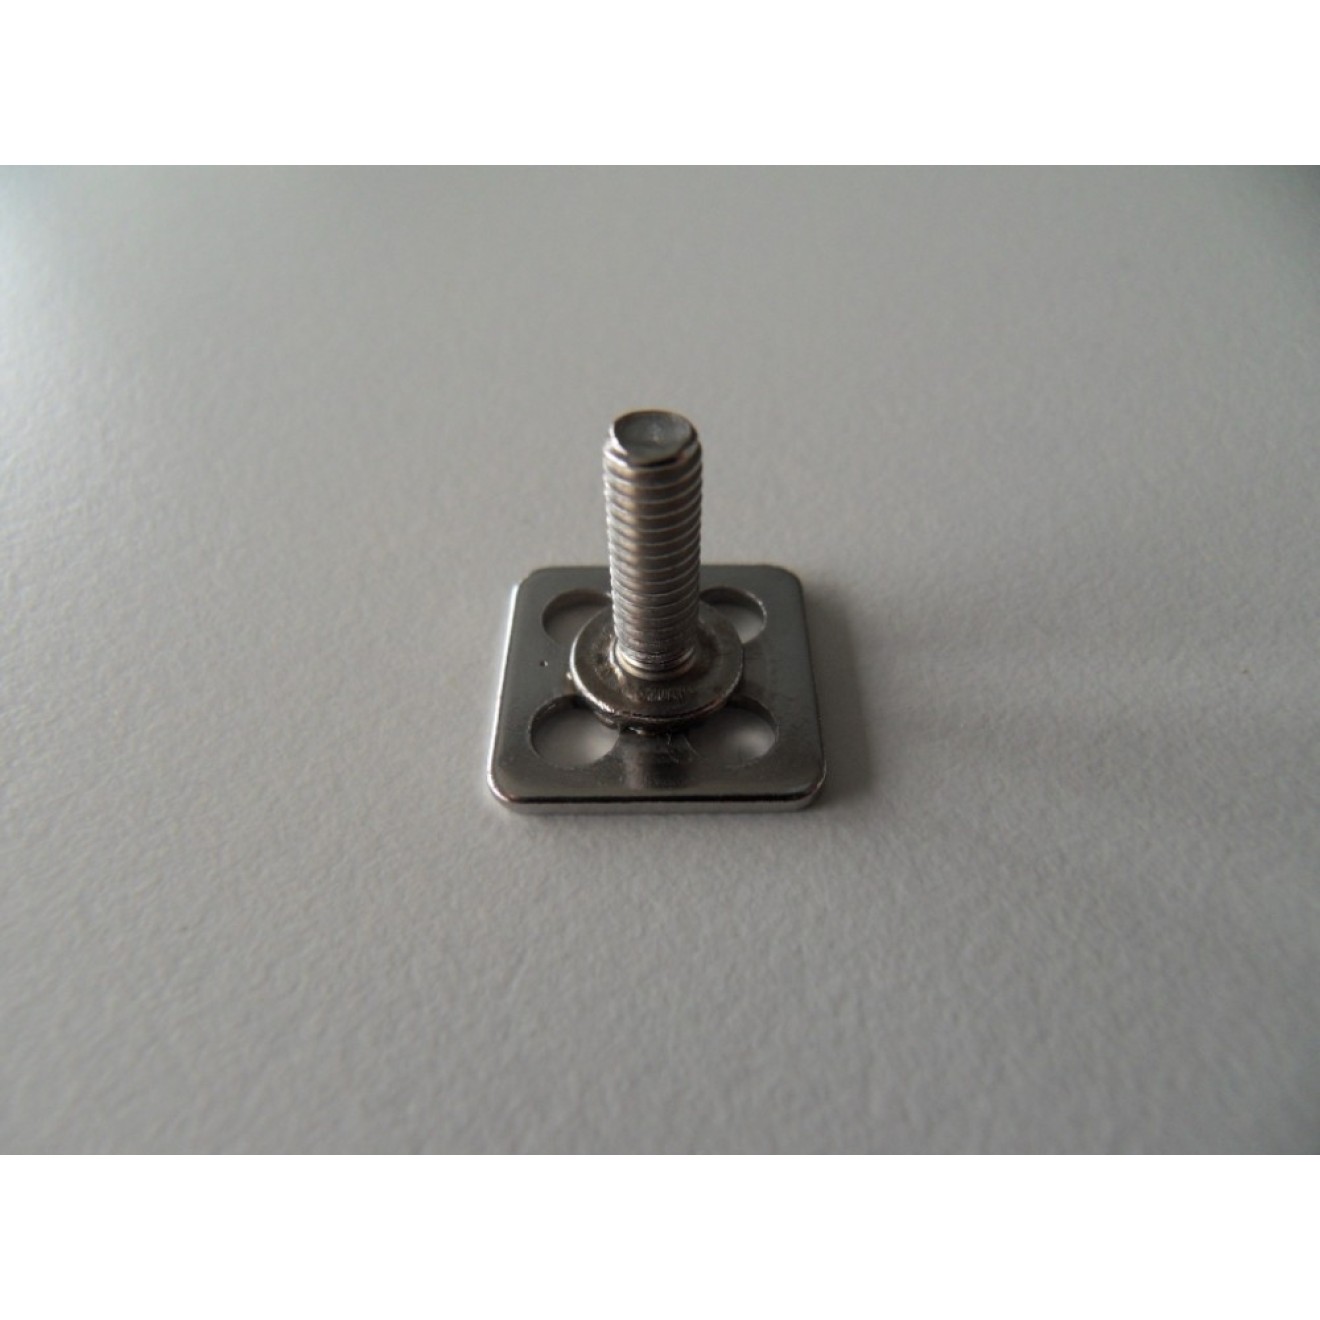 Stainless steel fasteners, male threaded stud M4x12